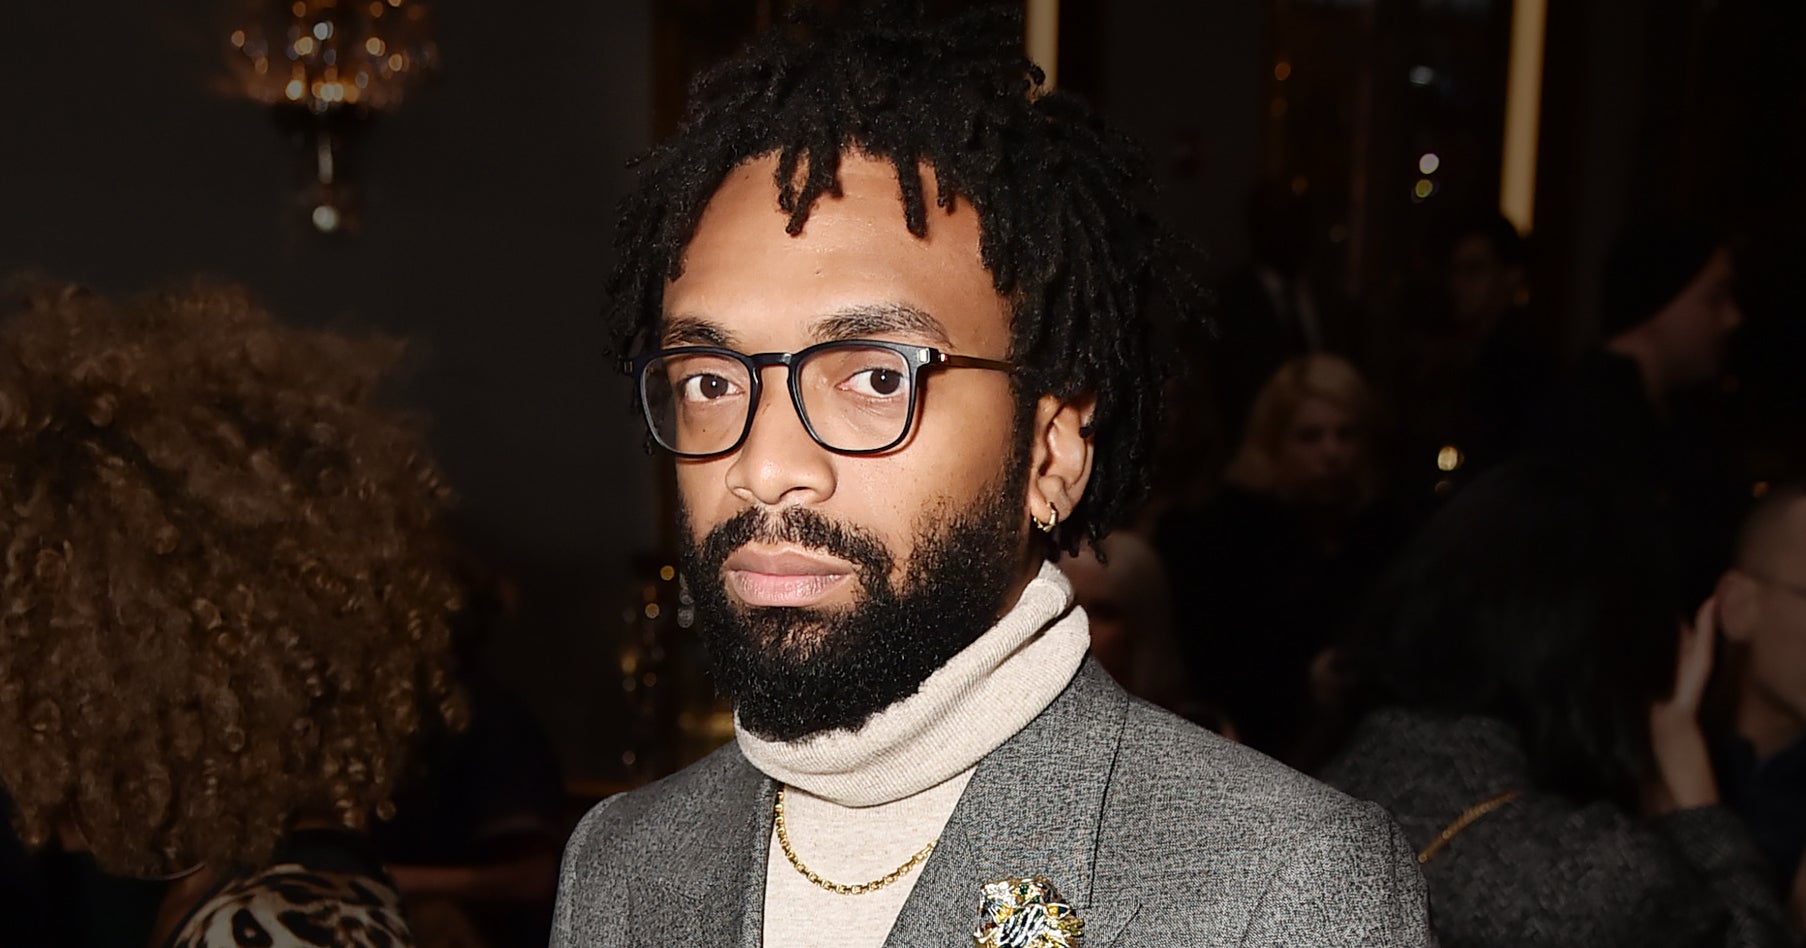 Pyer Moss designer Kerby Jean-Raymond is one of Fast Company's Most Cr